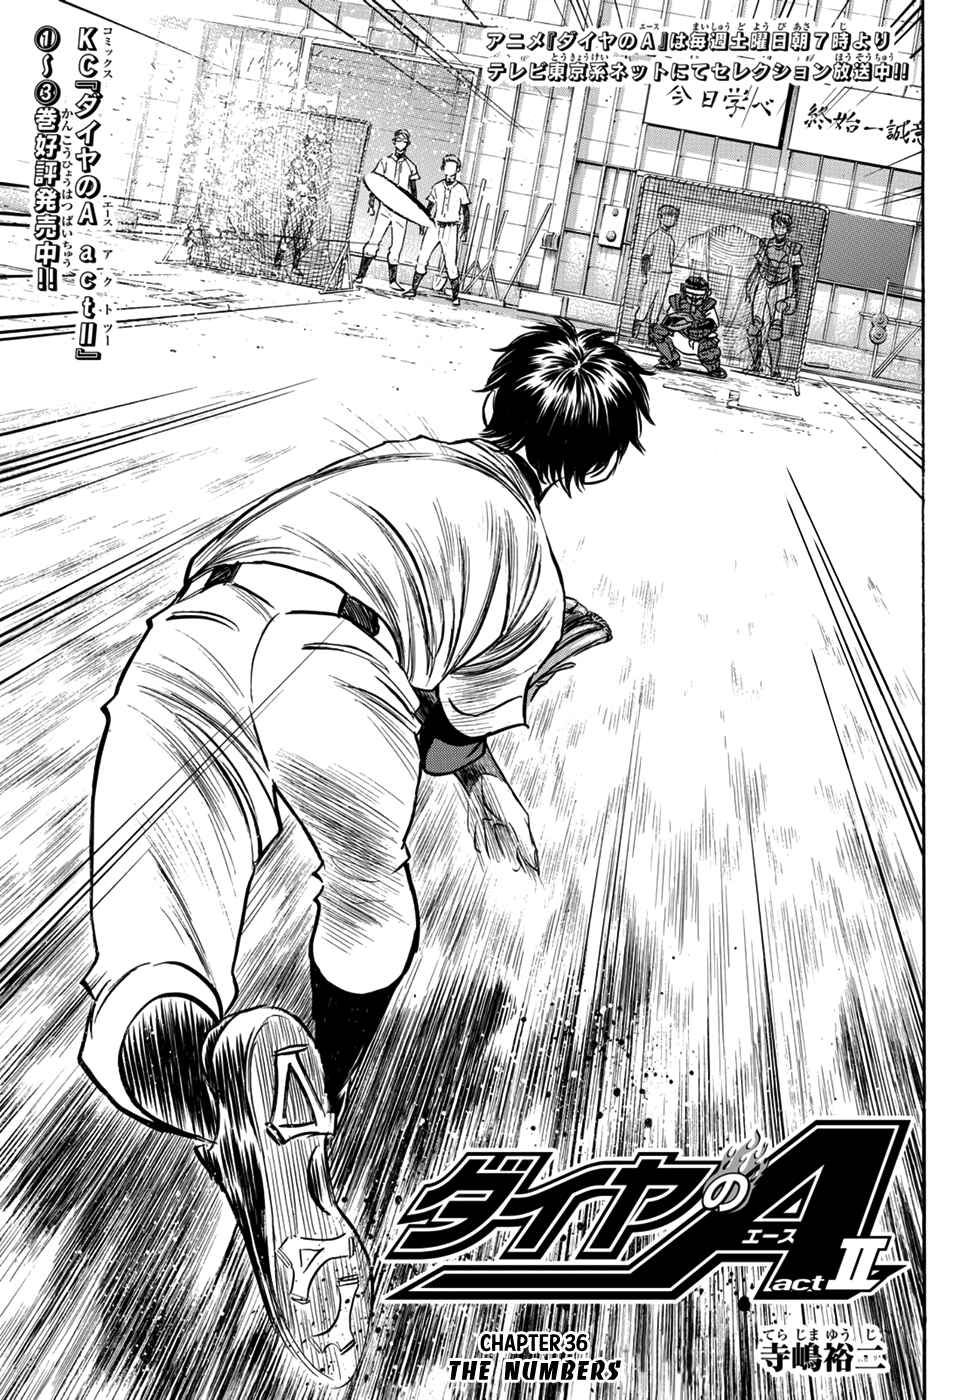 Diamond no Ace Act II Vol. 4 Ch. 36 The Numbers